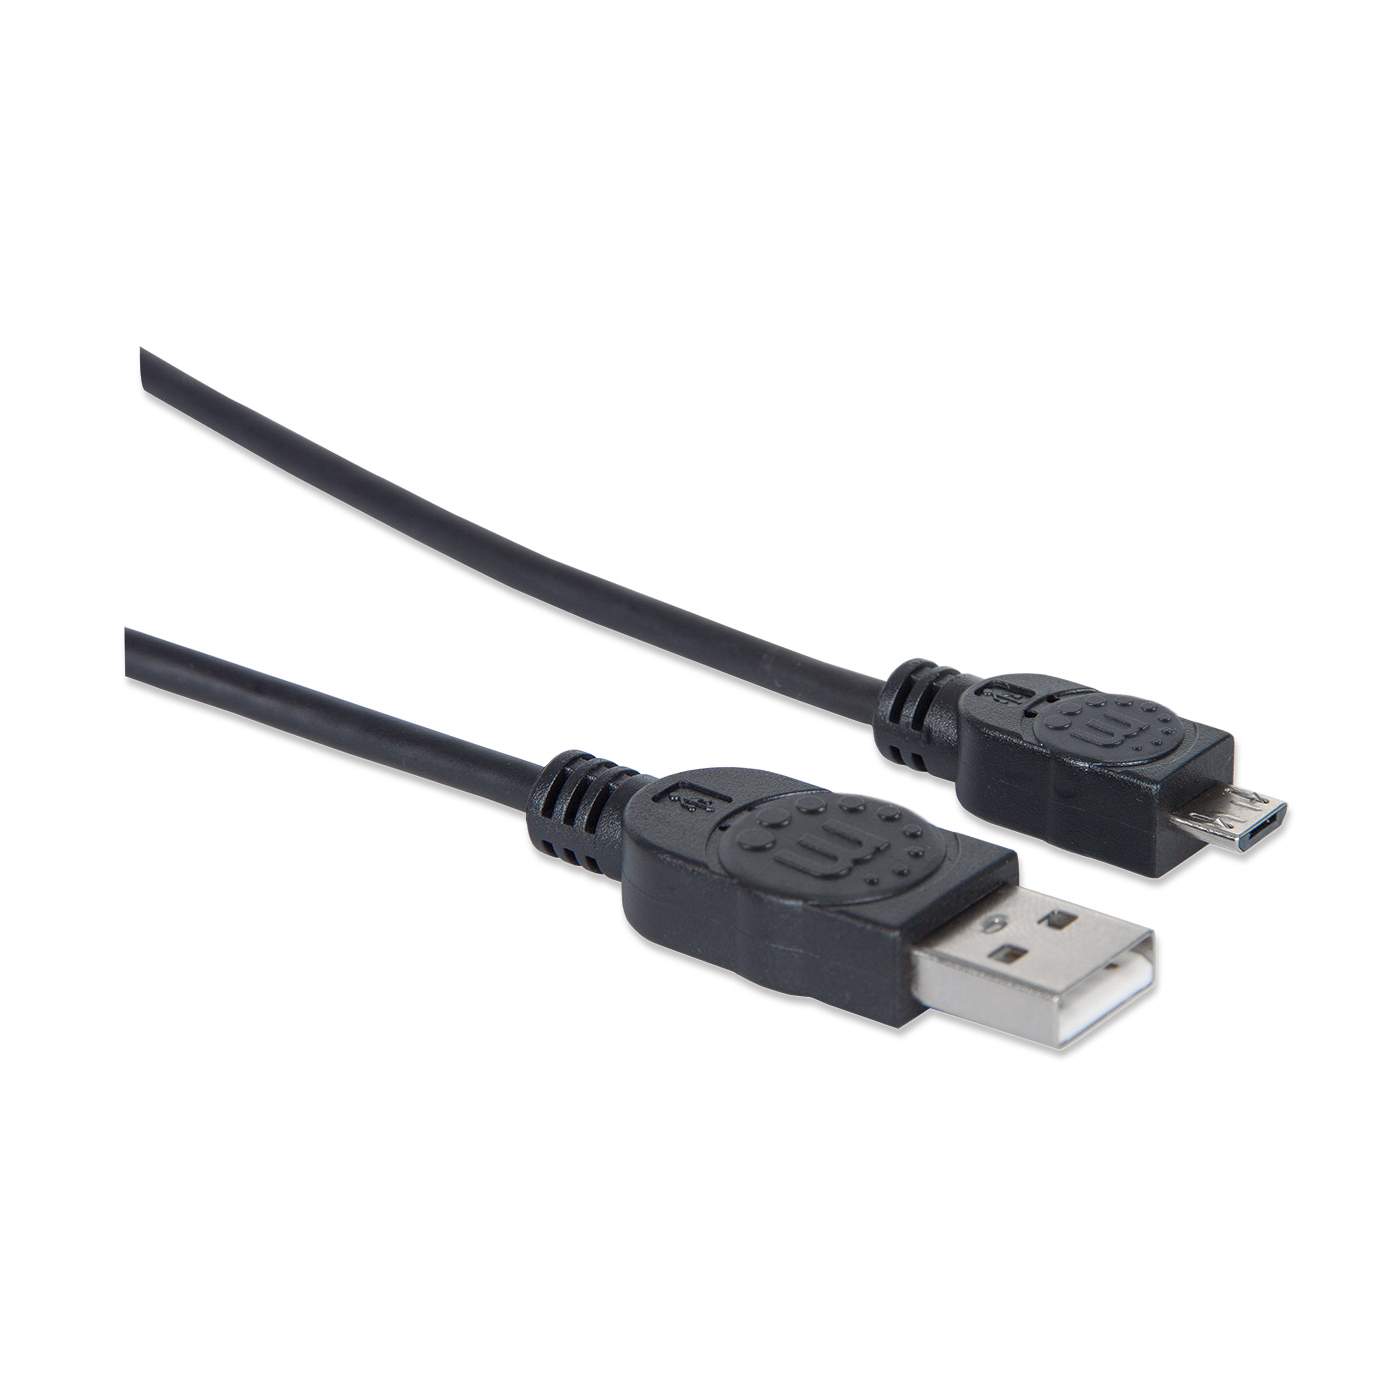 Hi-Speed USB Micro-B Device Cable Image 3